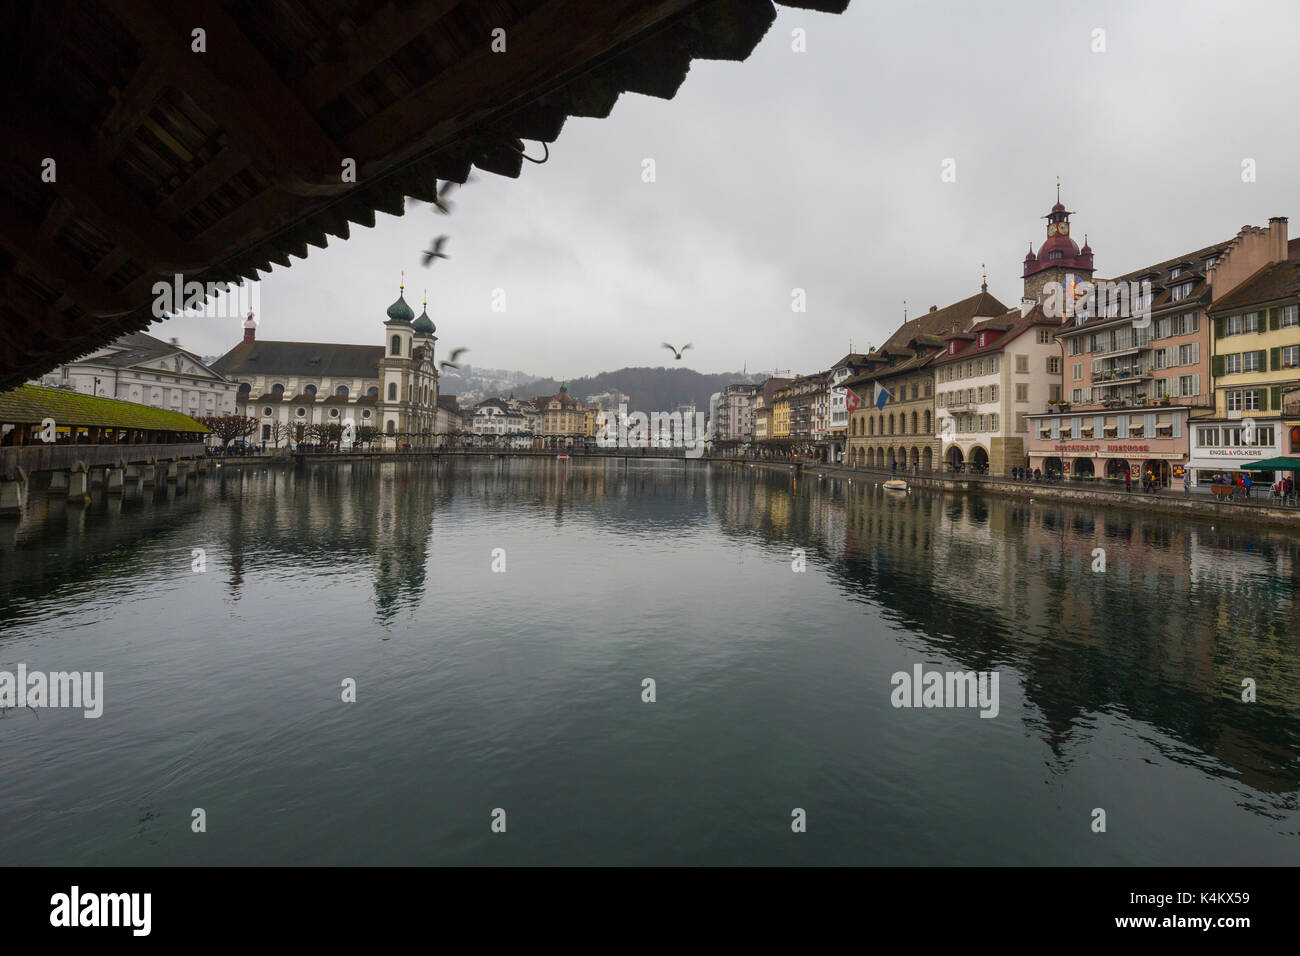 View of Jesuit Church and typical buildings from Chapel Bridge on river Reuss Rathausquai Lucerne Switzerland Europe Stock Photo